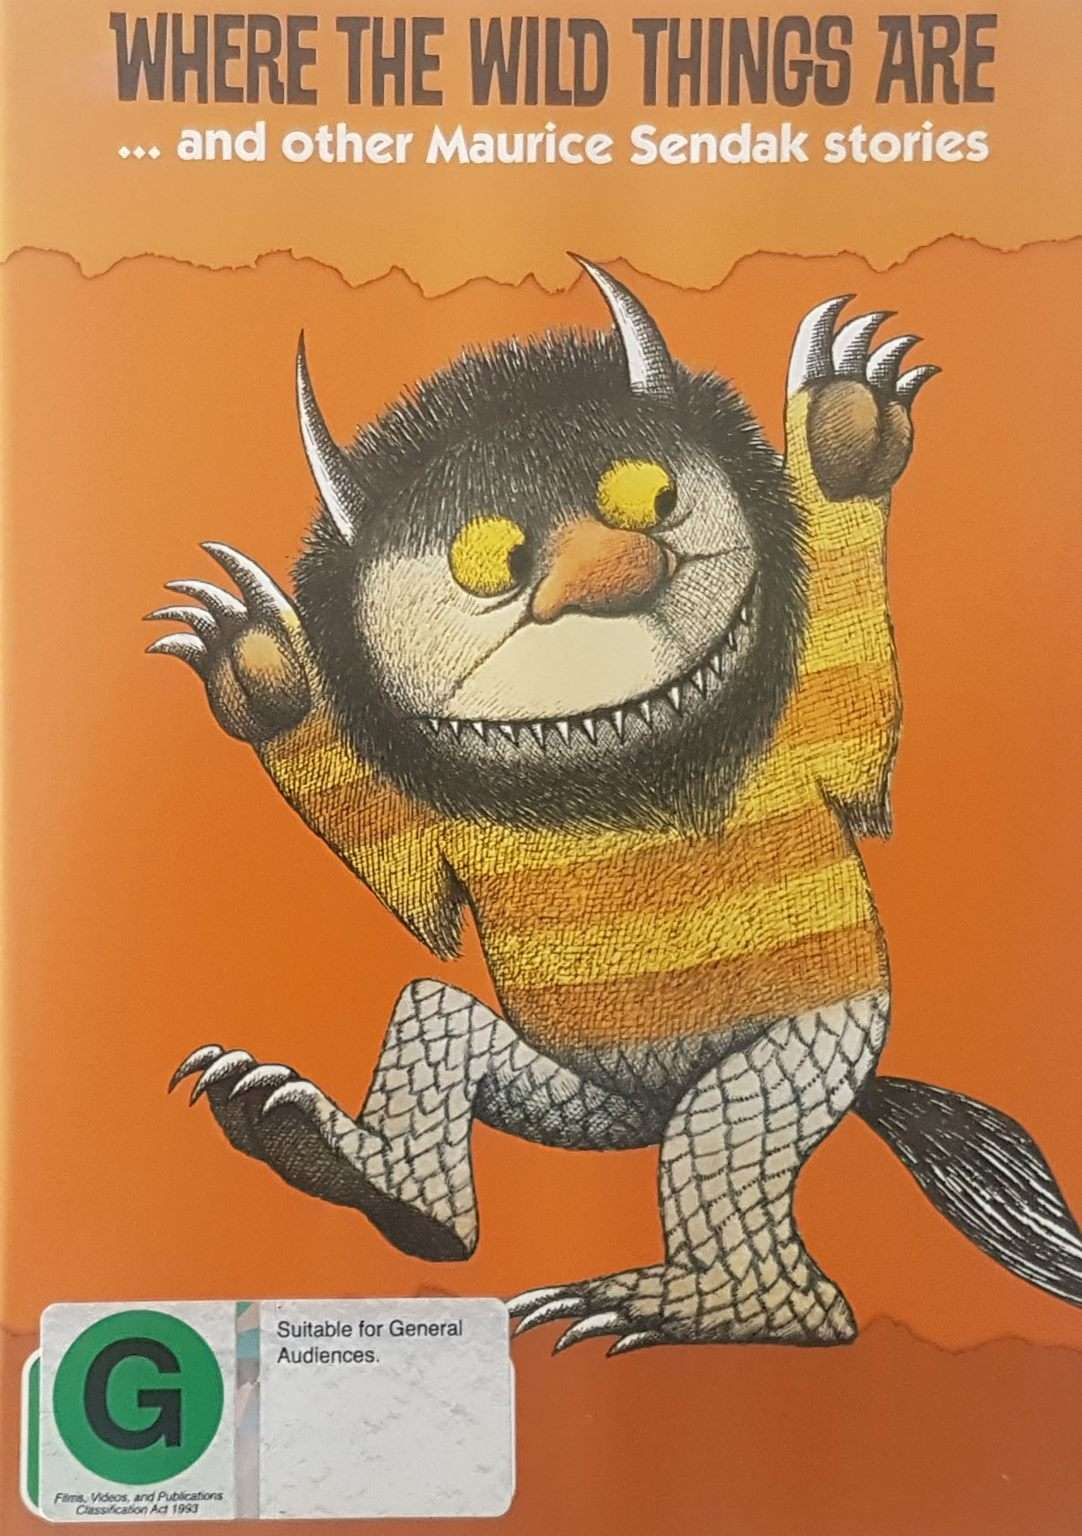 Where the Wild Things Are and other Maurice Sendak stories